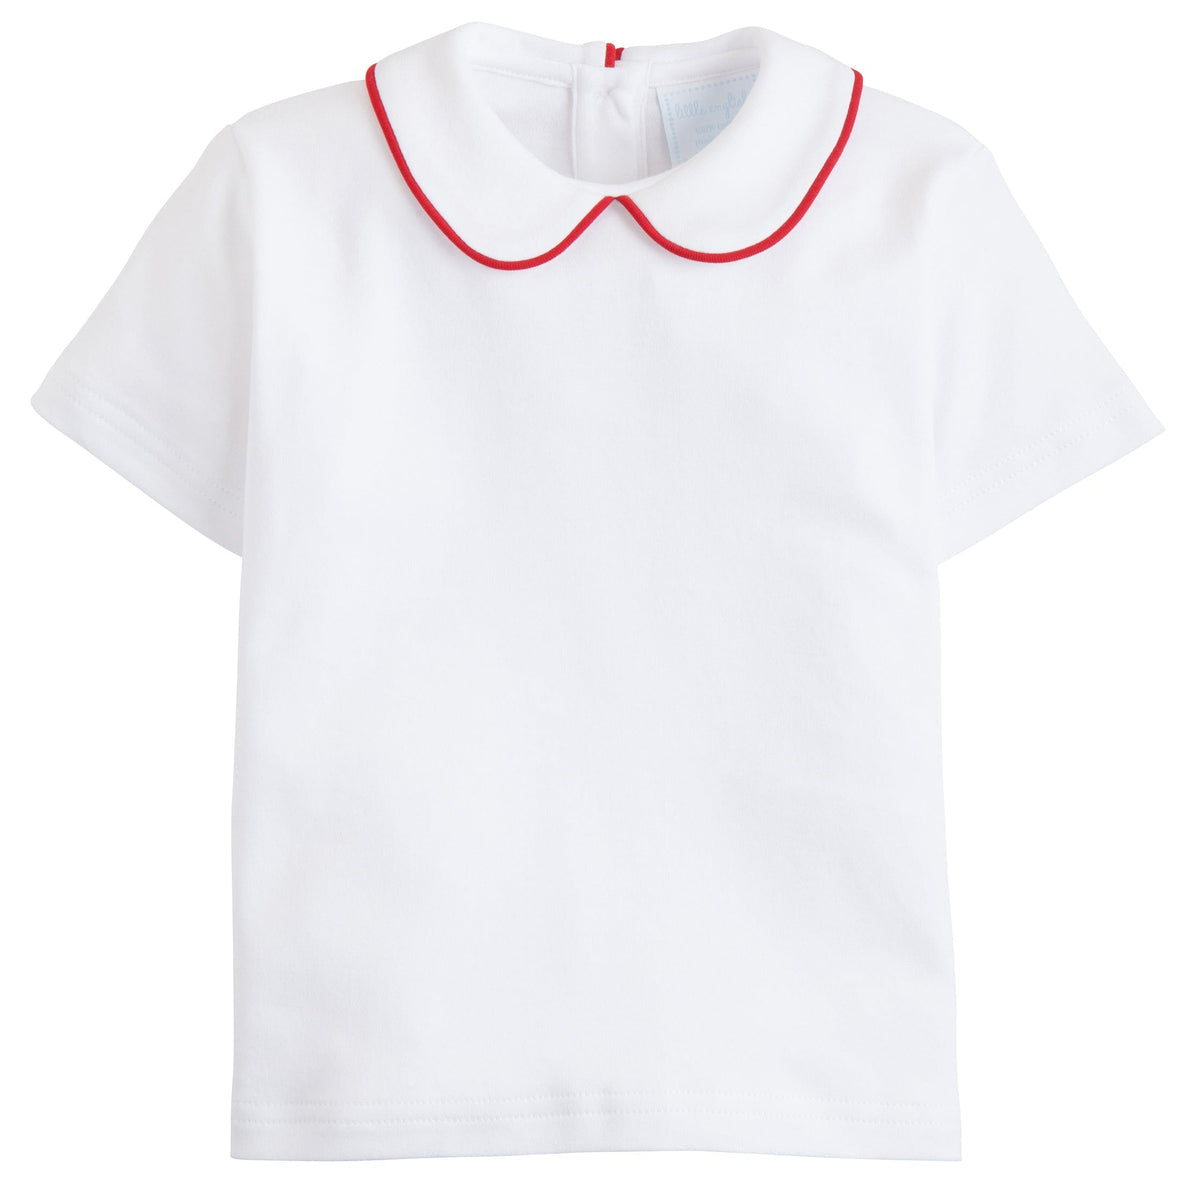 Red Piped Peter Pan Short Sleeve Shirt